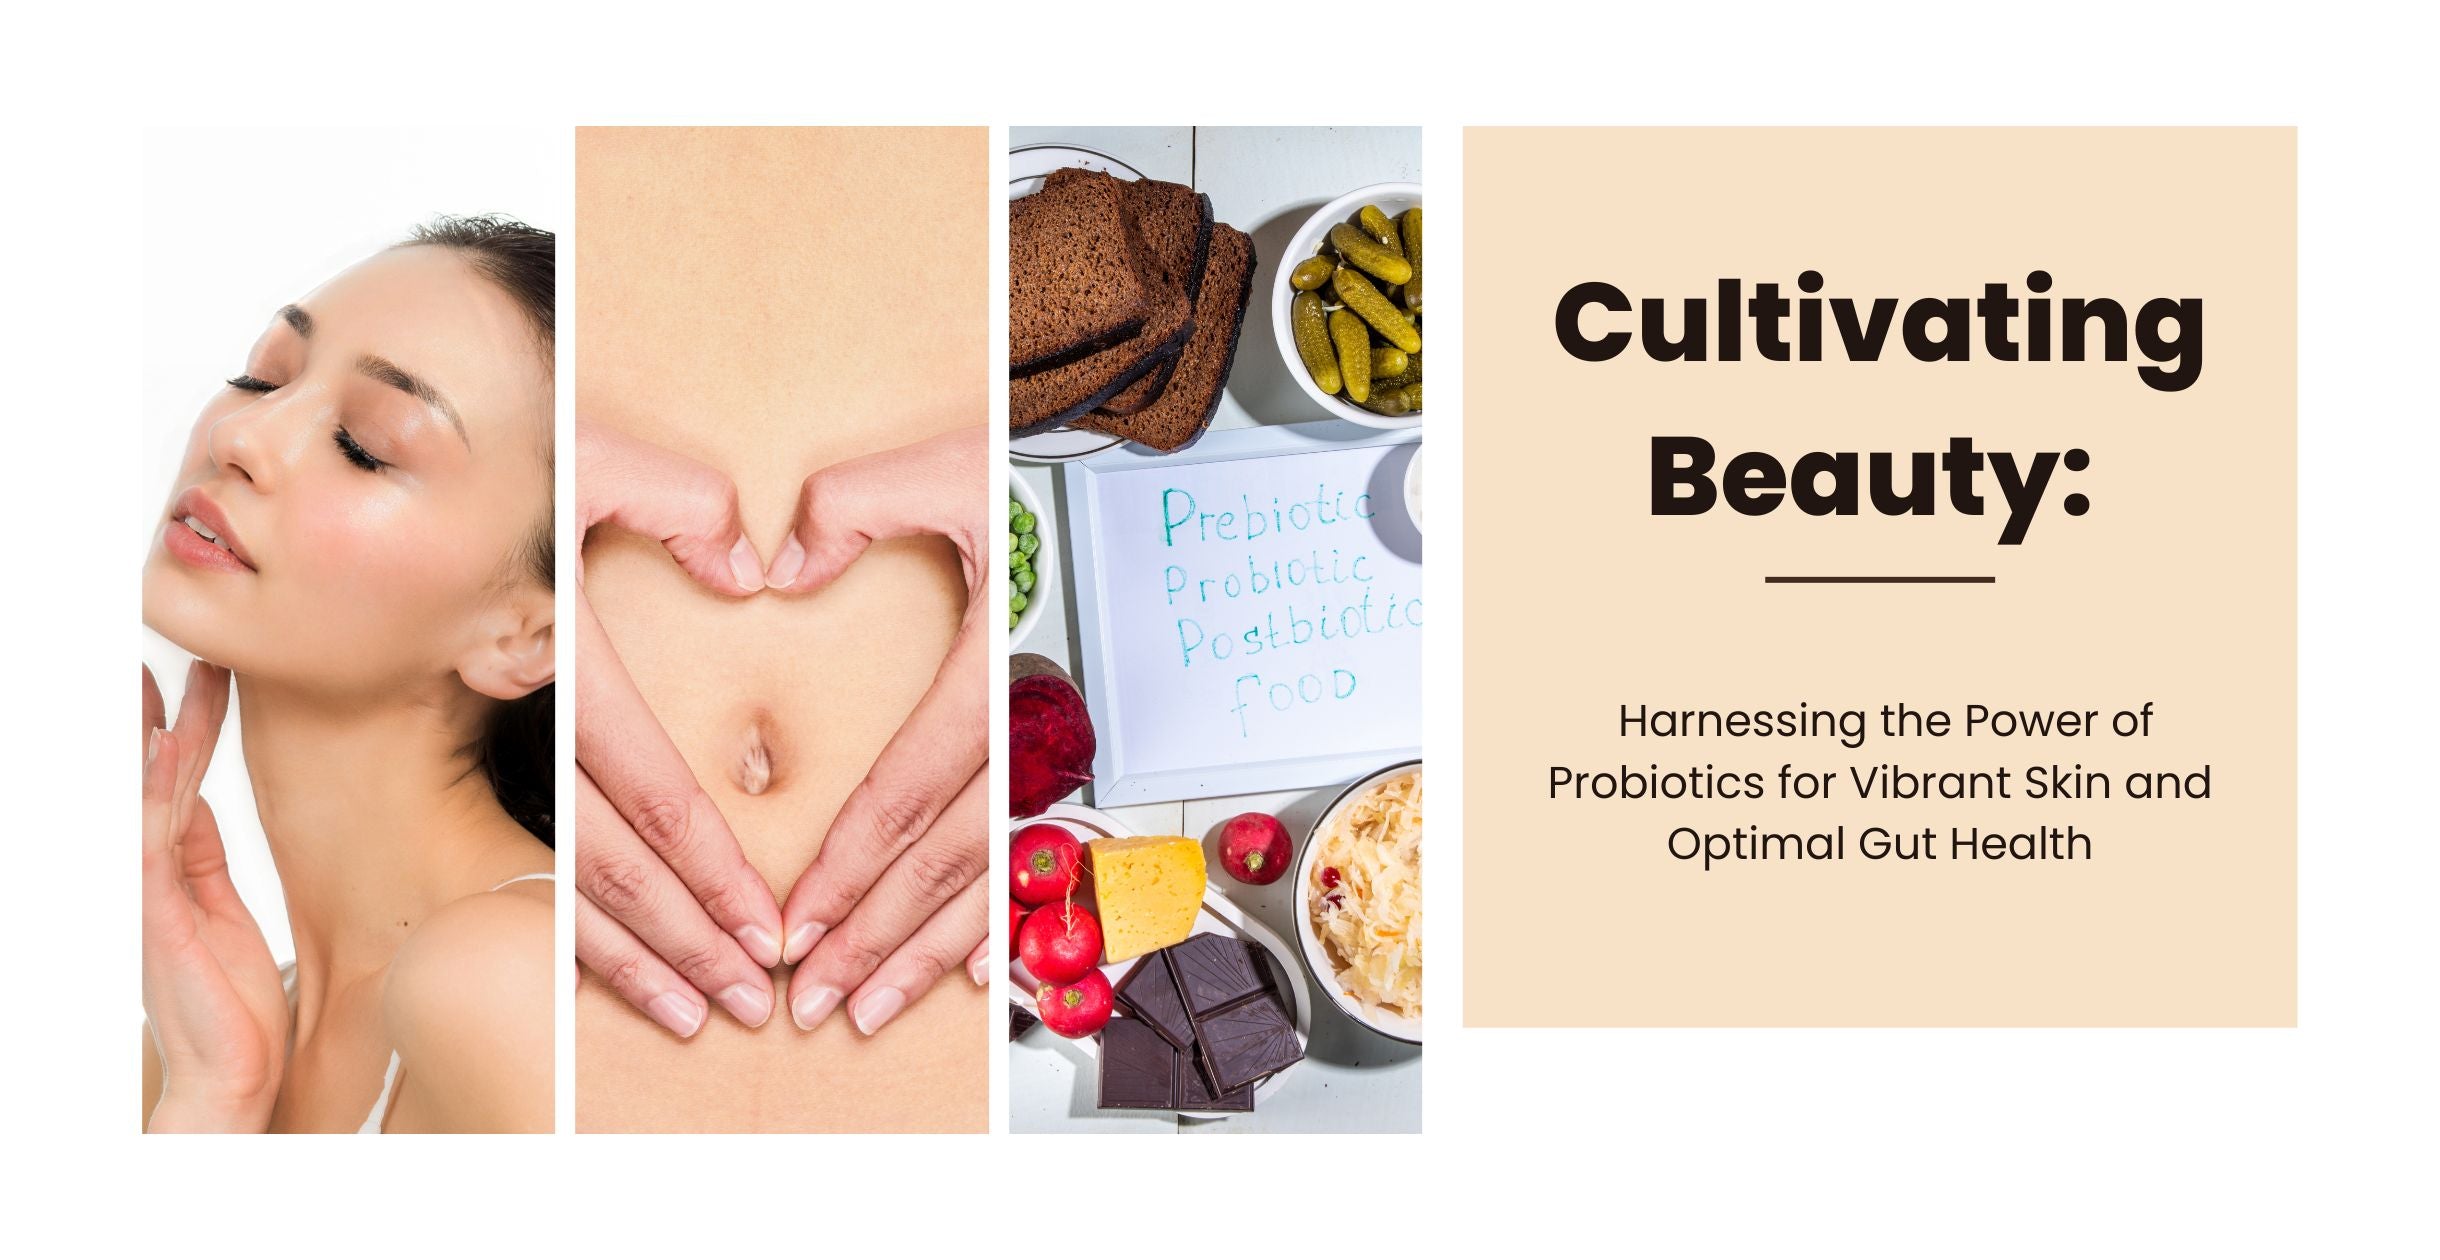 Cultivating Beauty: Harnessing the Power of Probiotics for Vibrant Skin and Optimal Gut Health